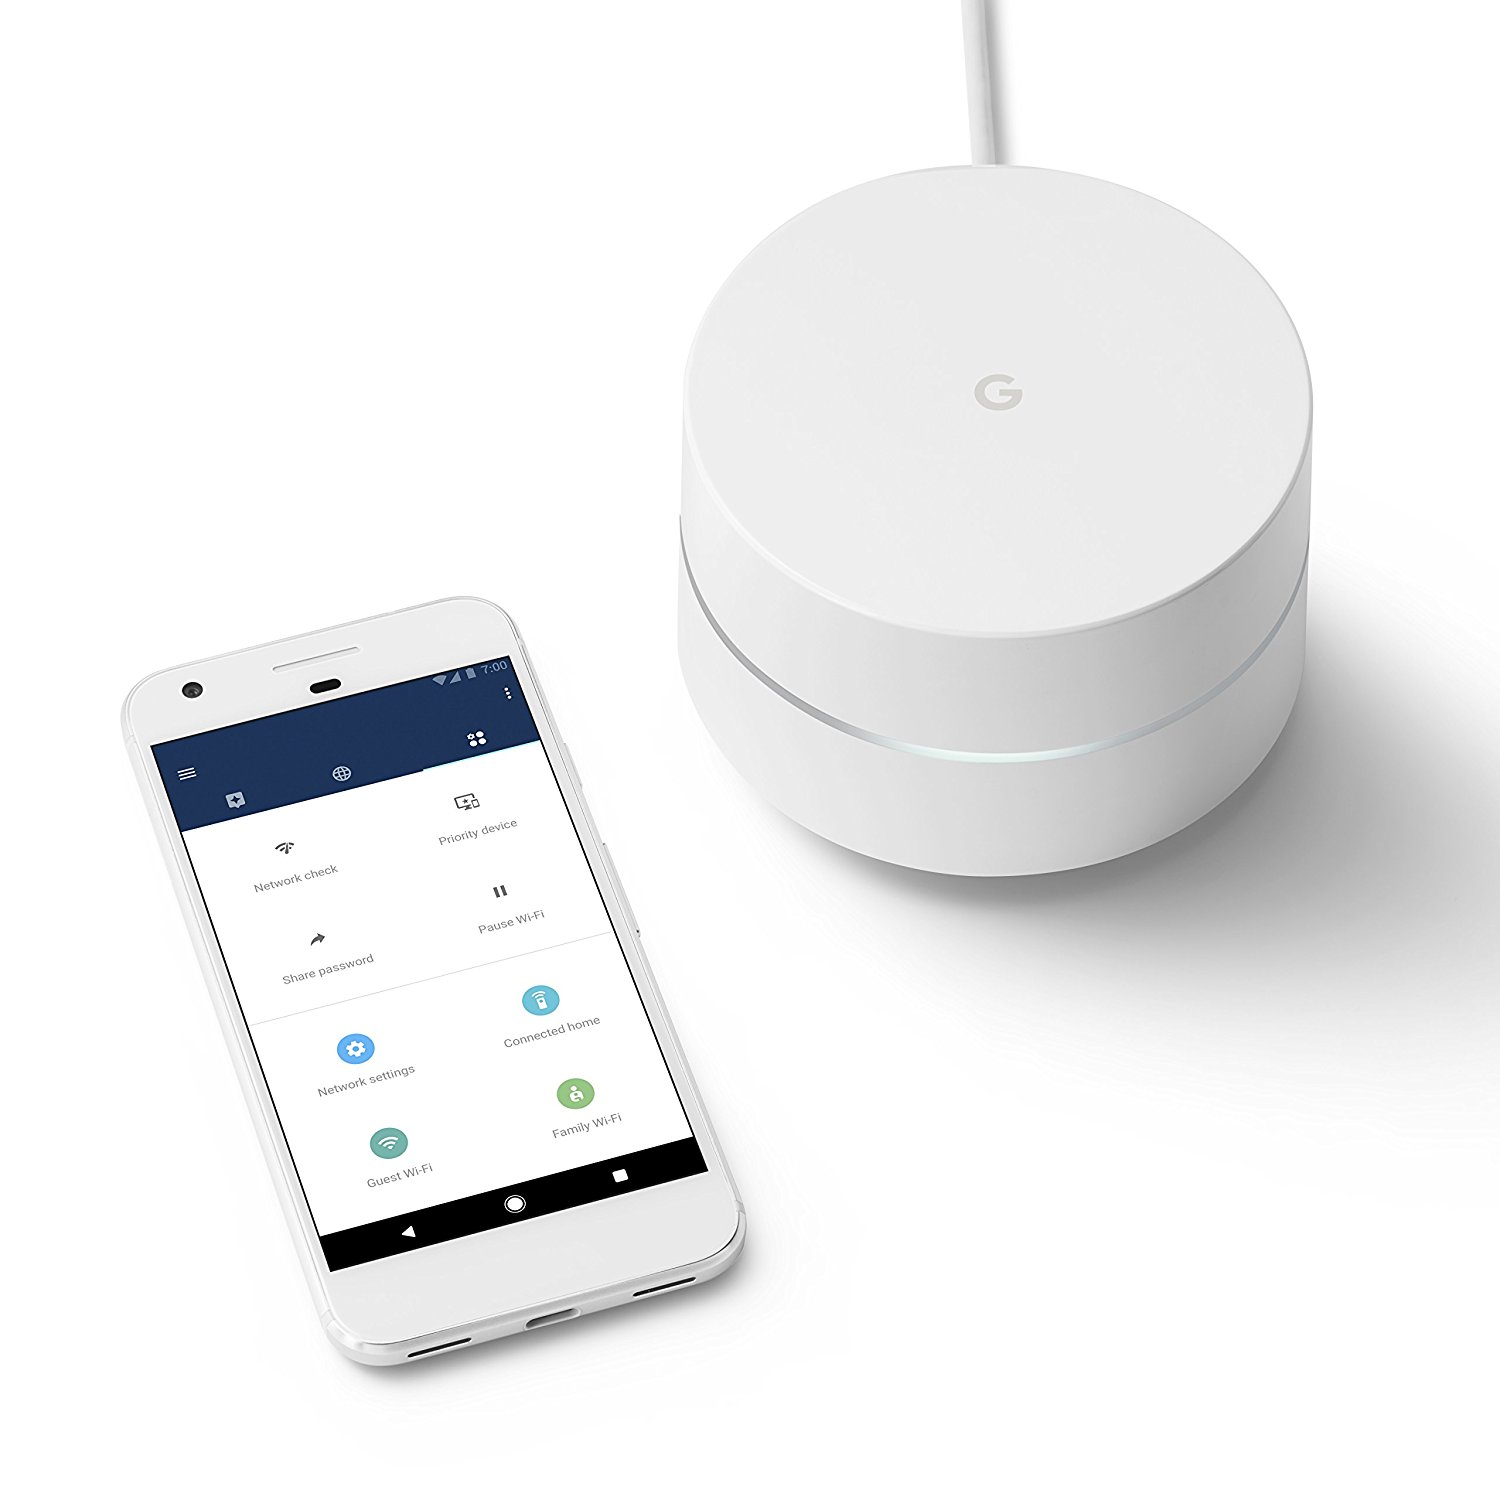 How to fix the most common Google Nest Wi-Fi problems?